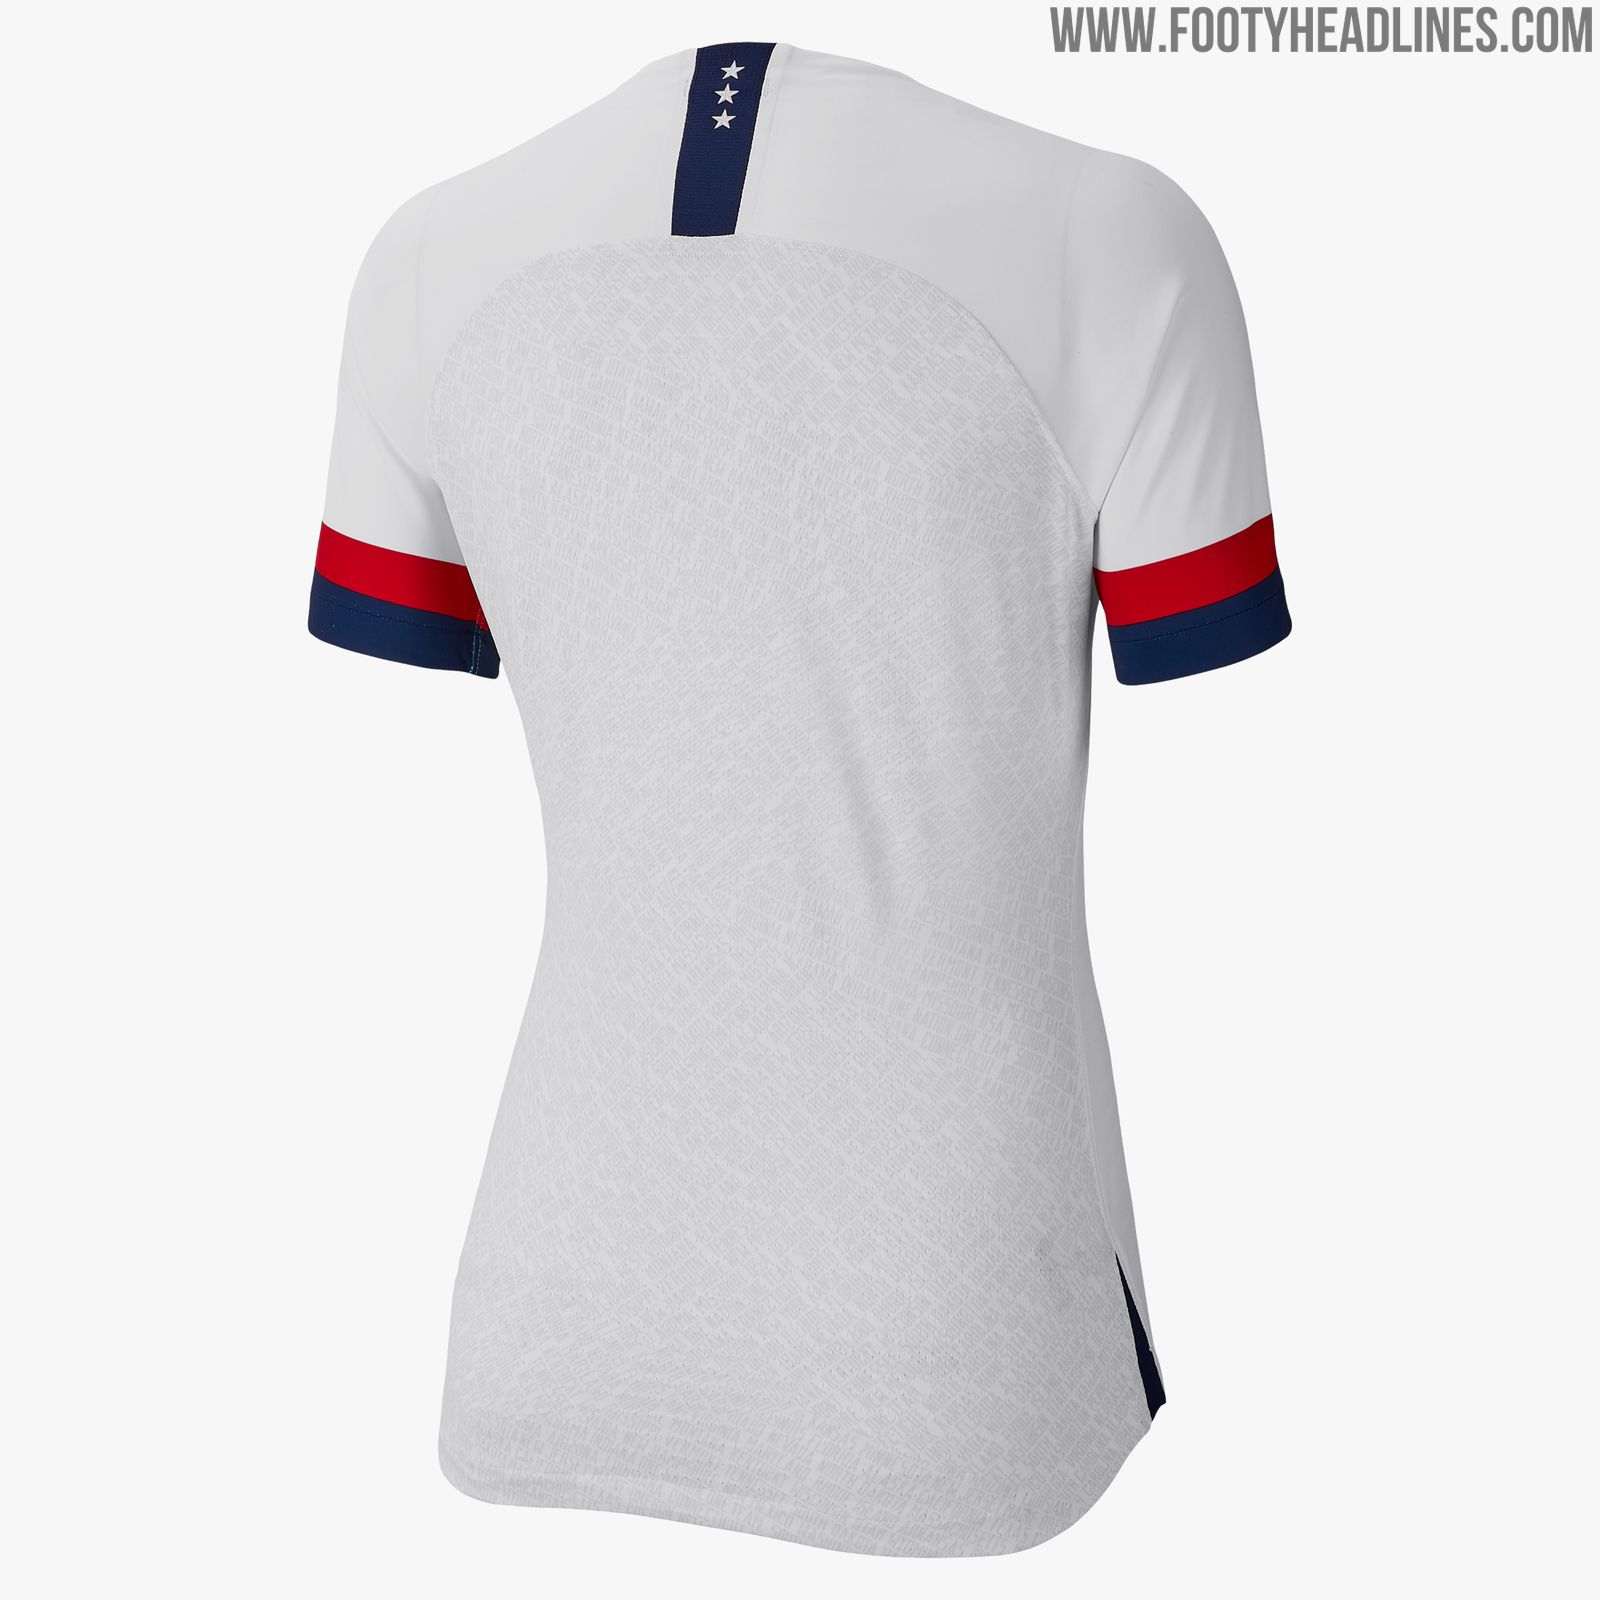 USA 2019 Women's World Cup Home Kit Released - Footy Headlines